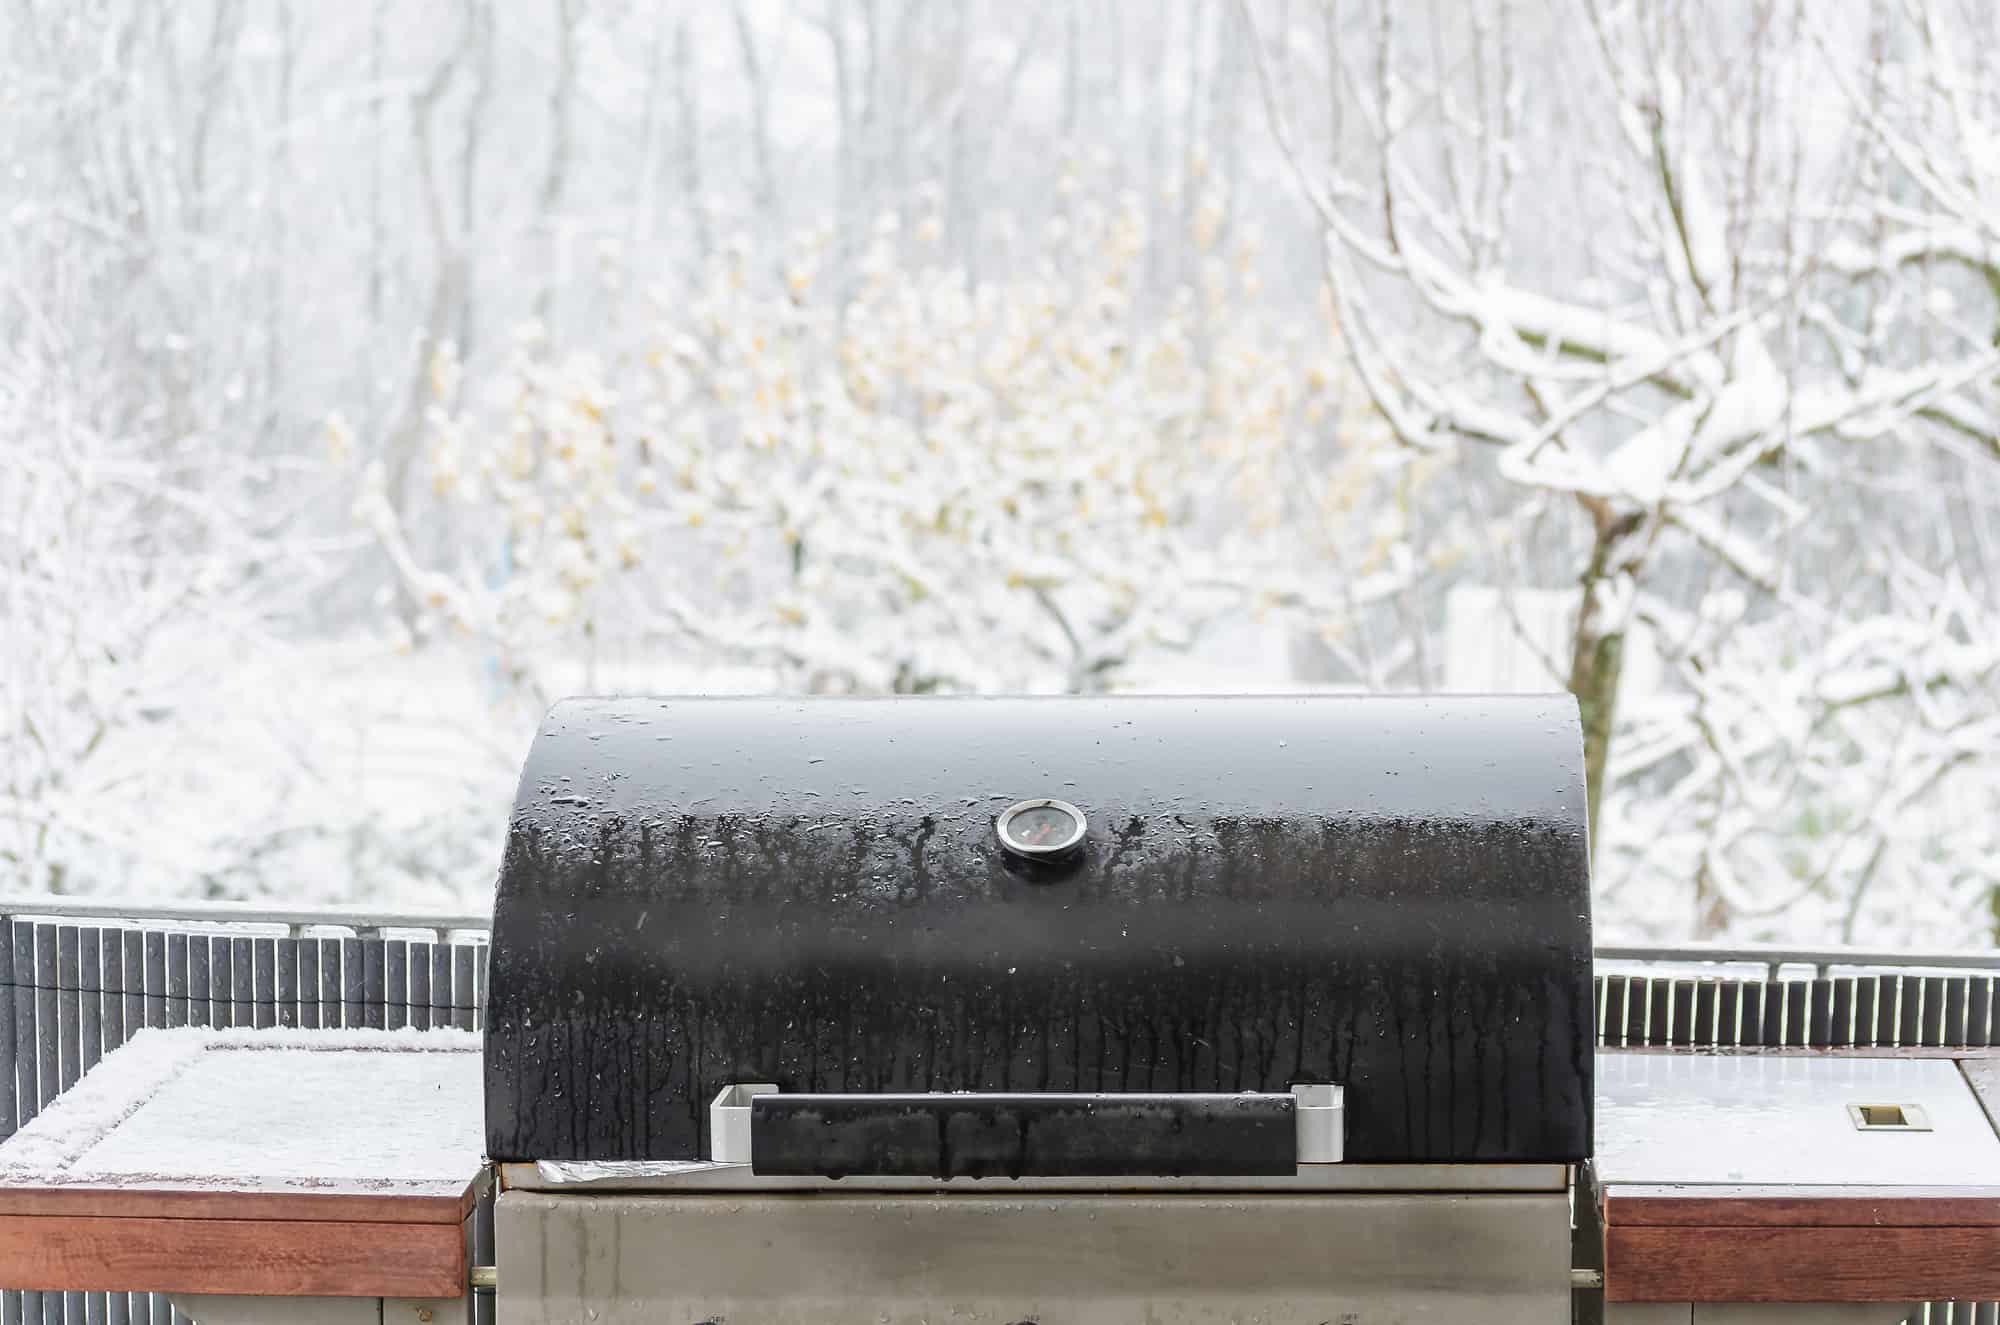 BBQ on the outside balcony in the winter snowstorm.